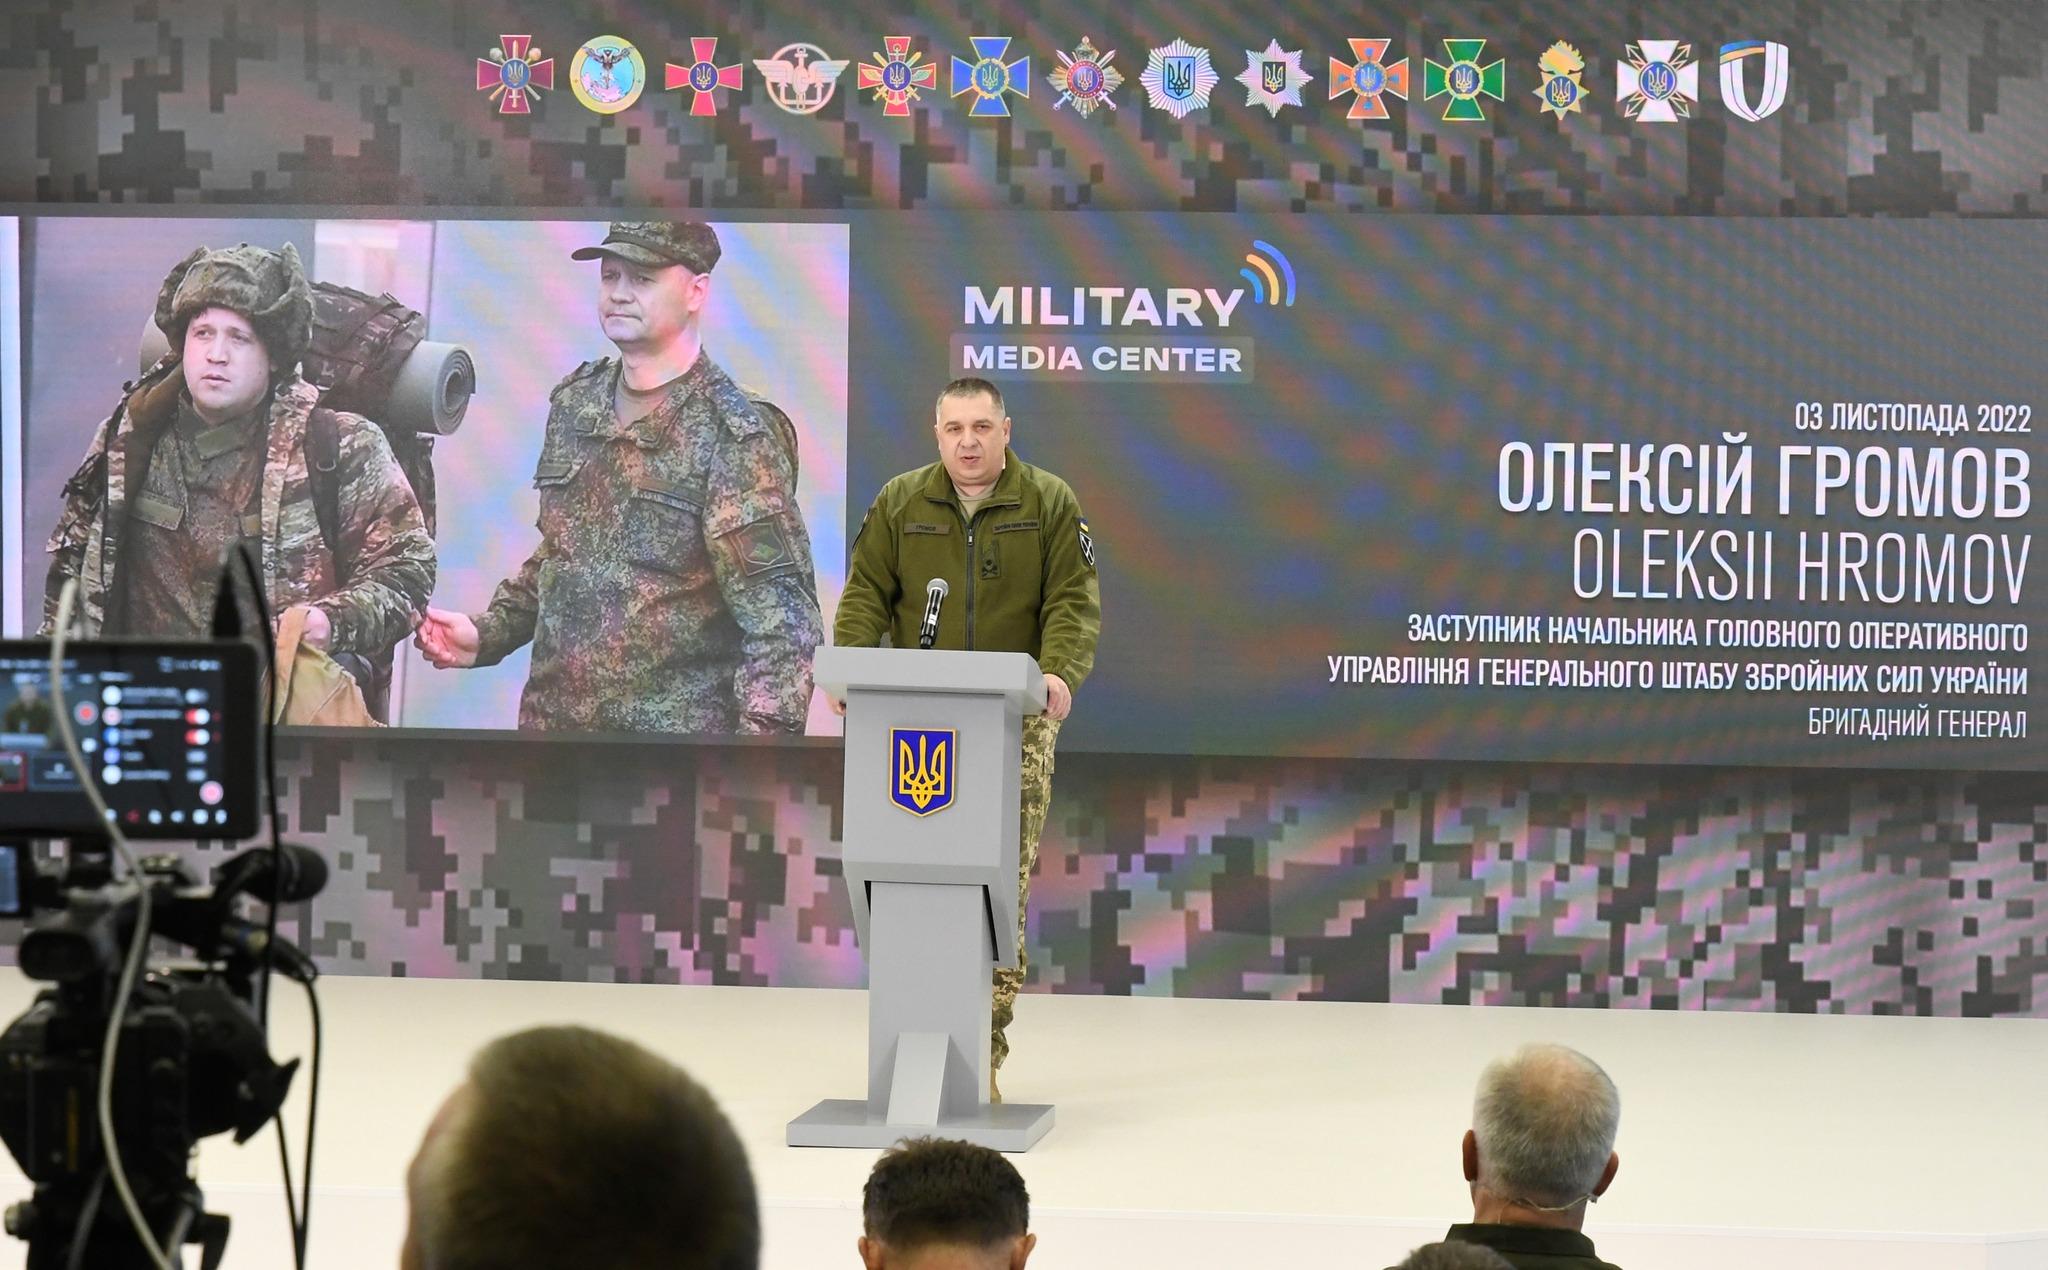 General Staff: The Armed Forces are resisting. Everything is working out for us